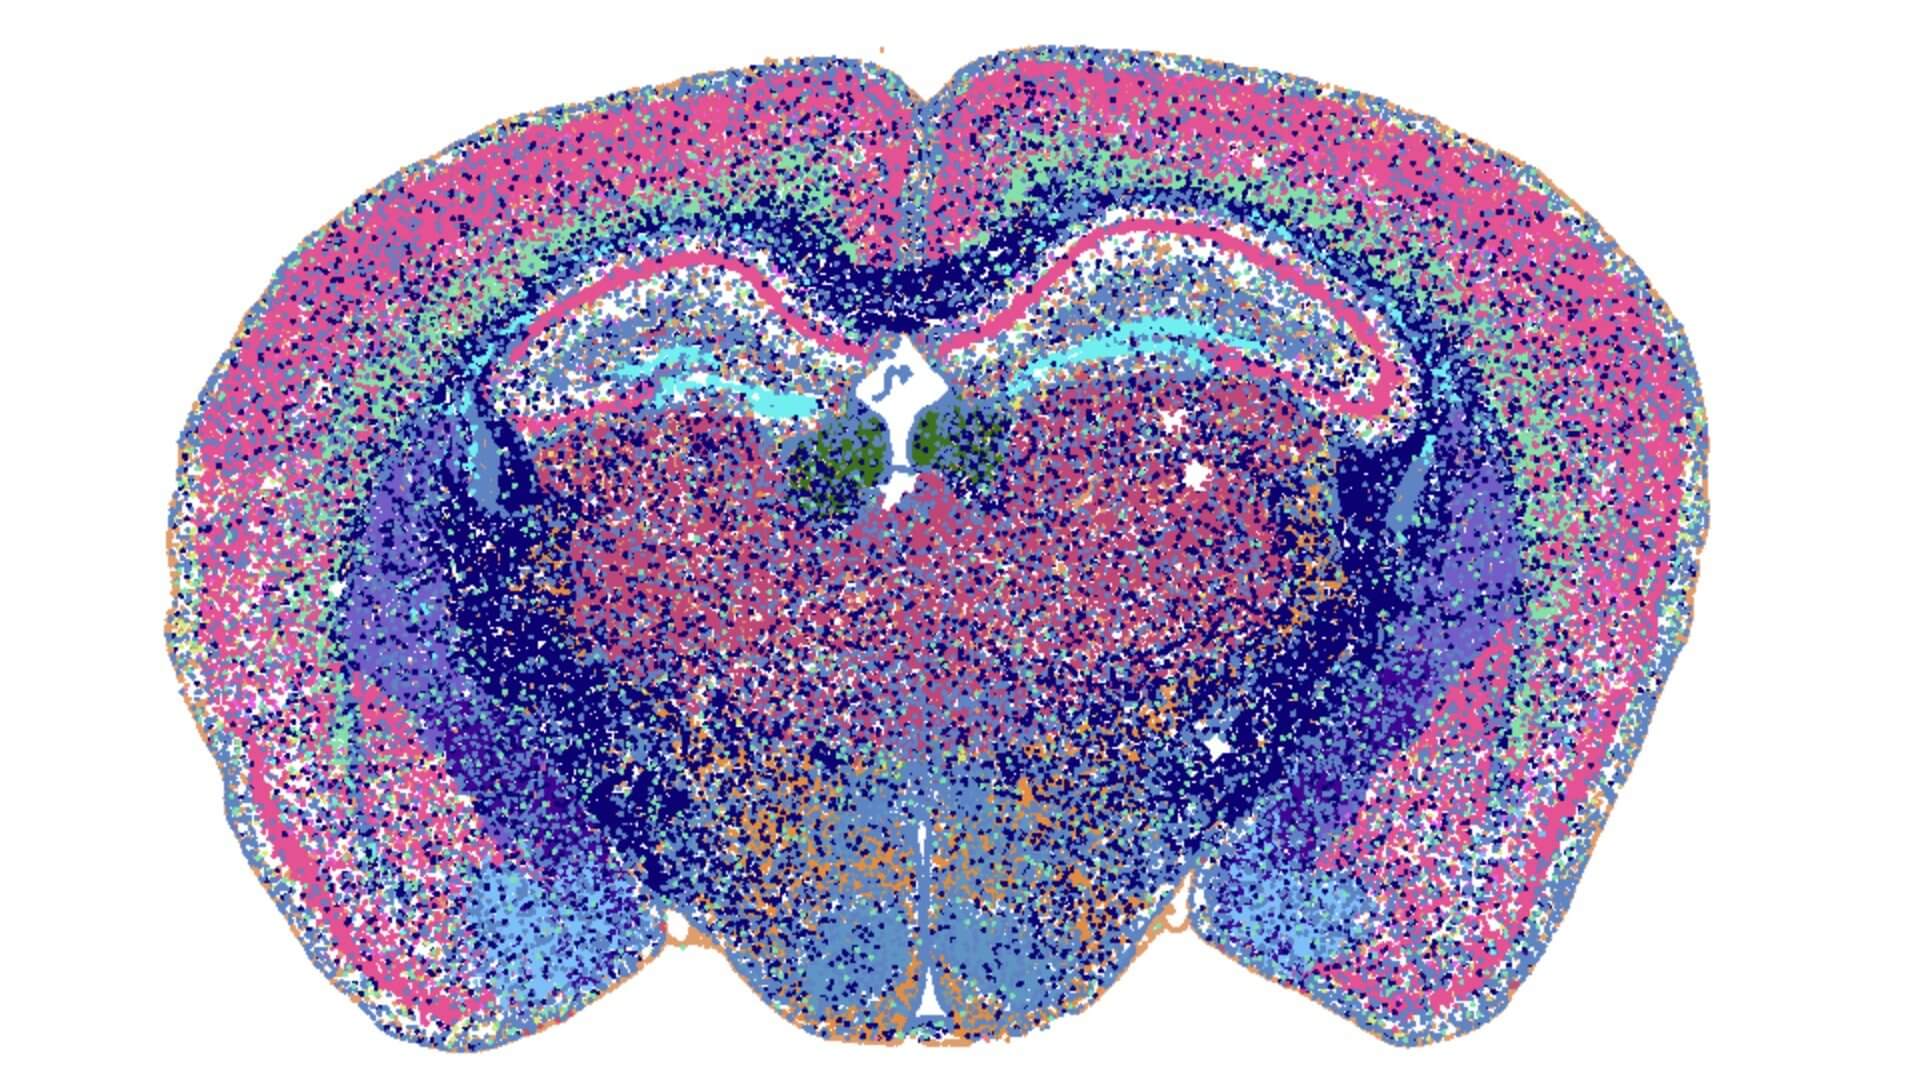 Whole mouse brain image showing spatial location of transcriptomic-defined cell types